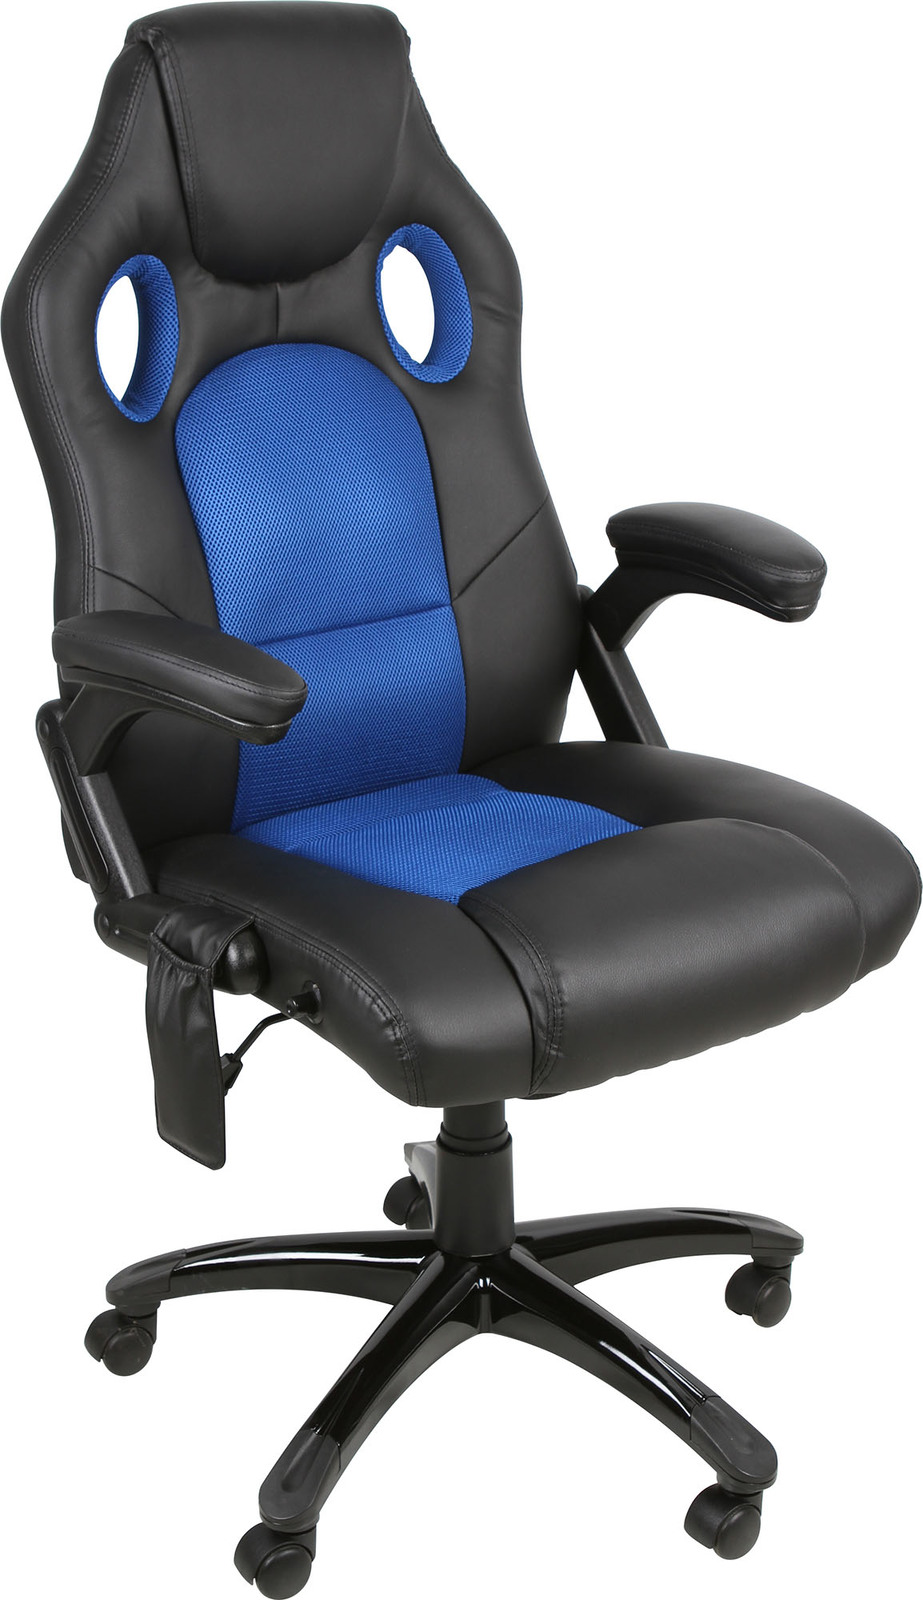 Brand New 8 Point Massage Balck and Blue Mesh Office Chair with Heating